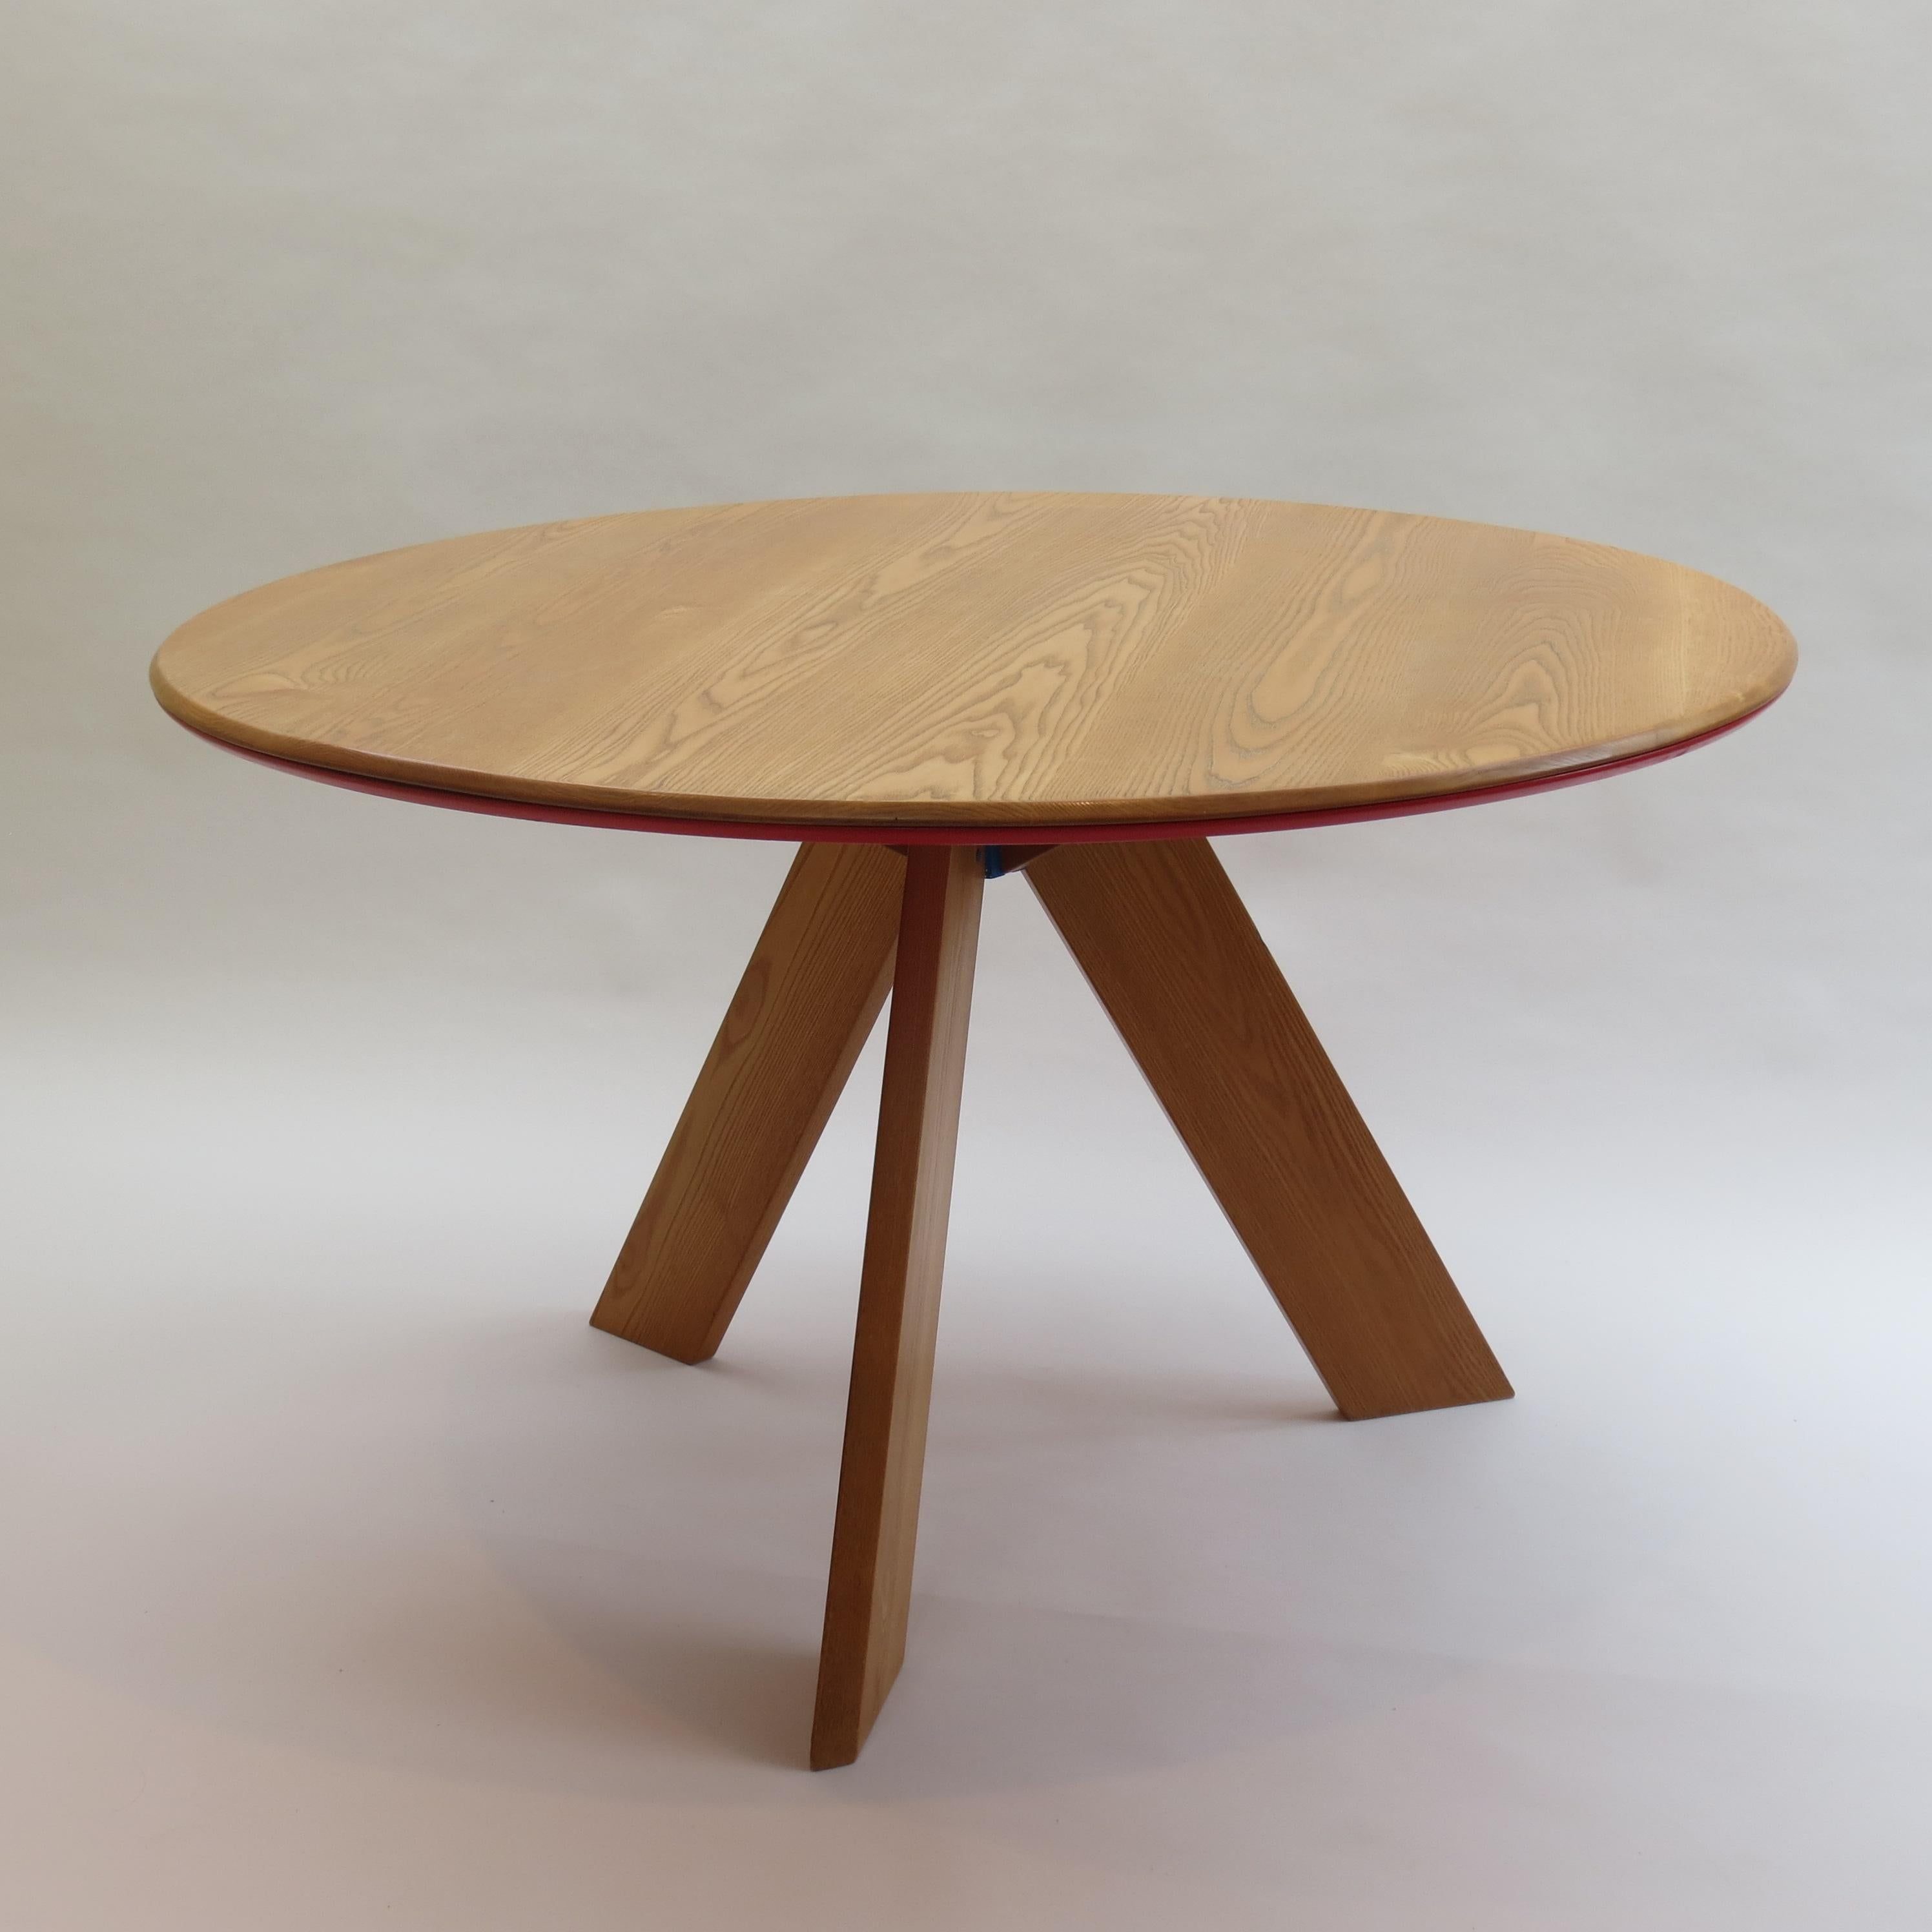 Midcentury Bespoke Circular Ash Dining Table by David Field 1980s with Red Blue 8